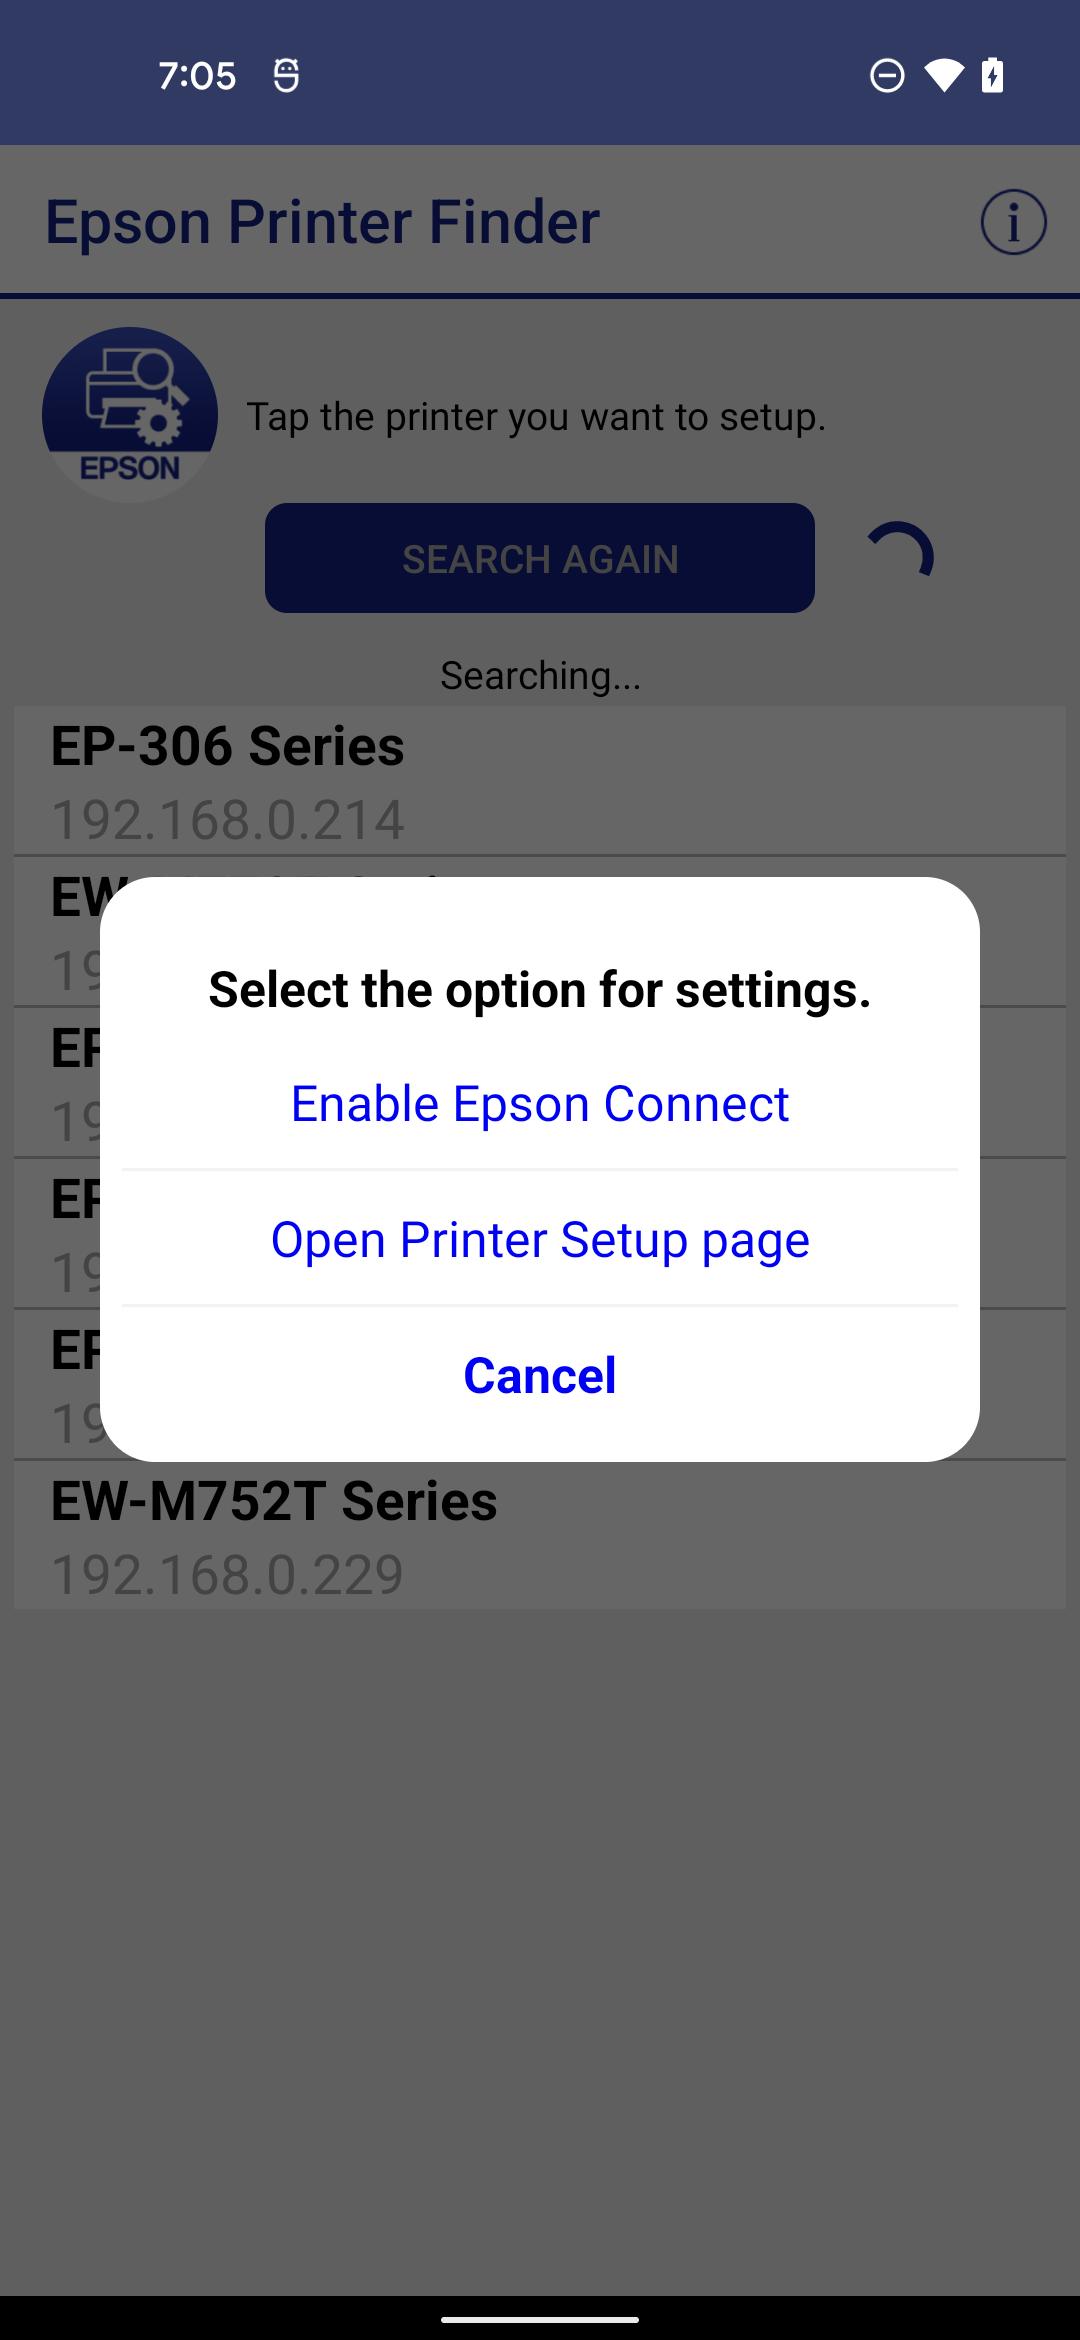 Epson Printer Finder for Android - APK Download